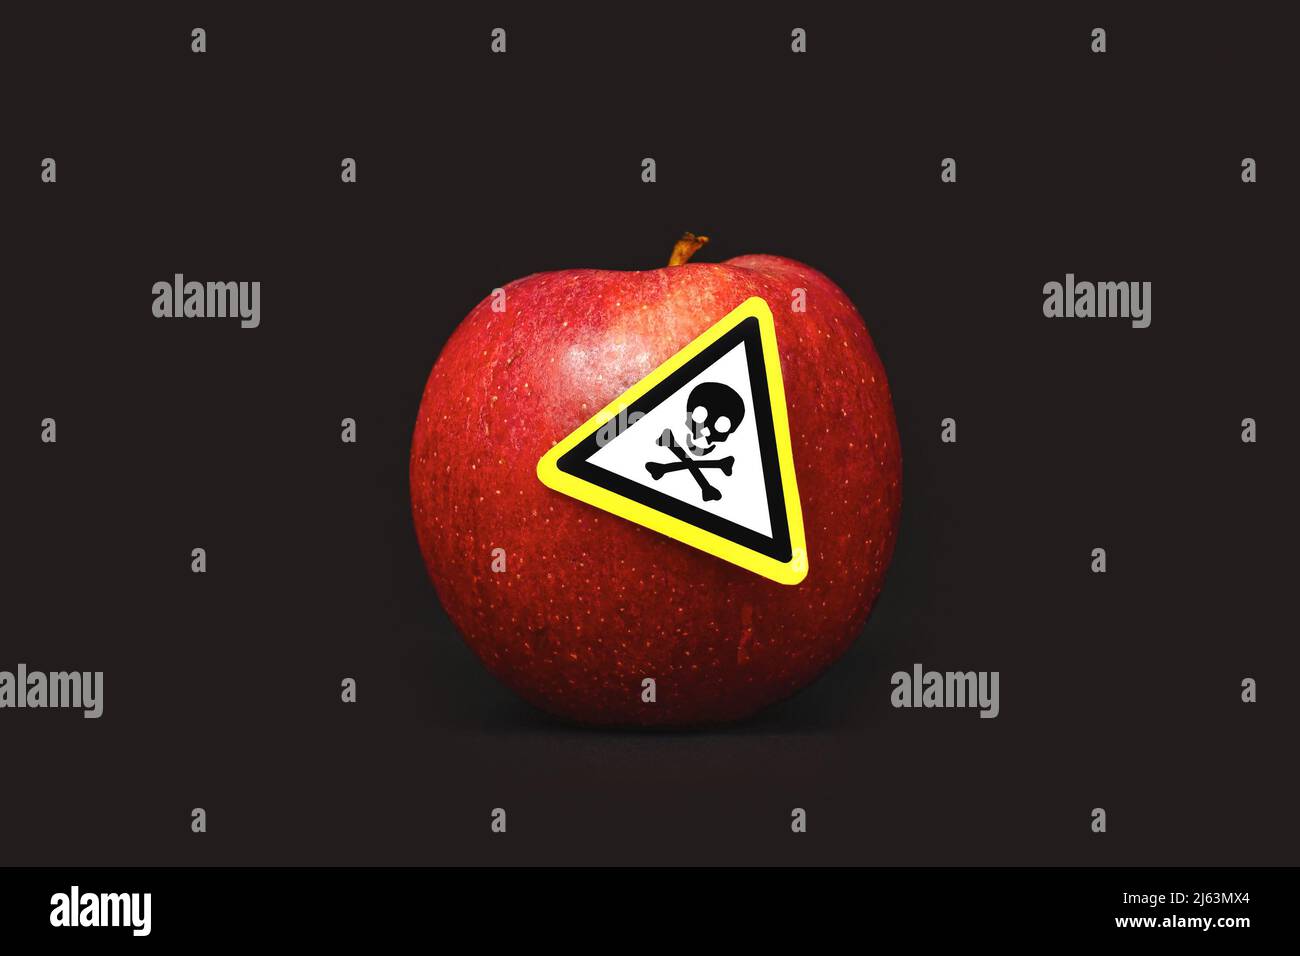 Concept for pesticide residues in agricultural food products dangerous to humans. A red apple with poison symbol sticker on black background Stock Photo